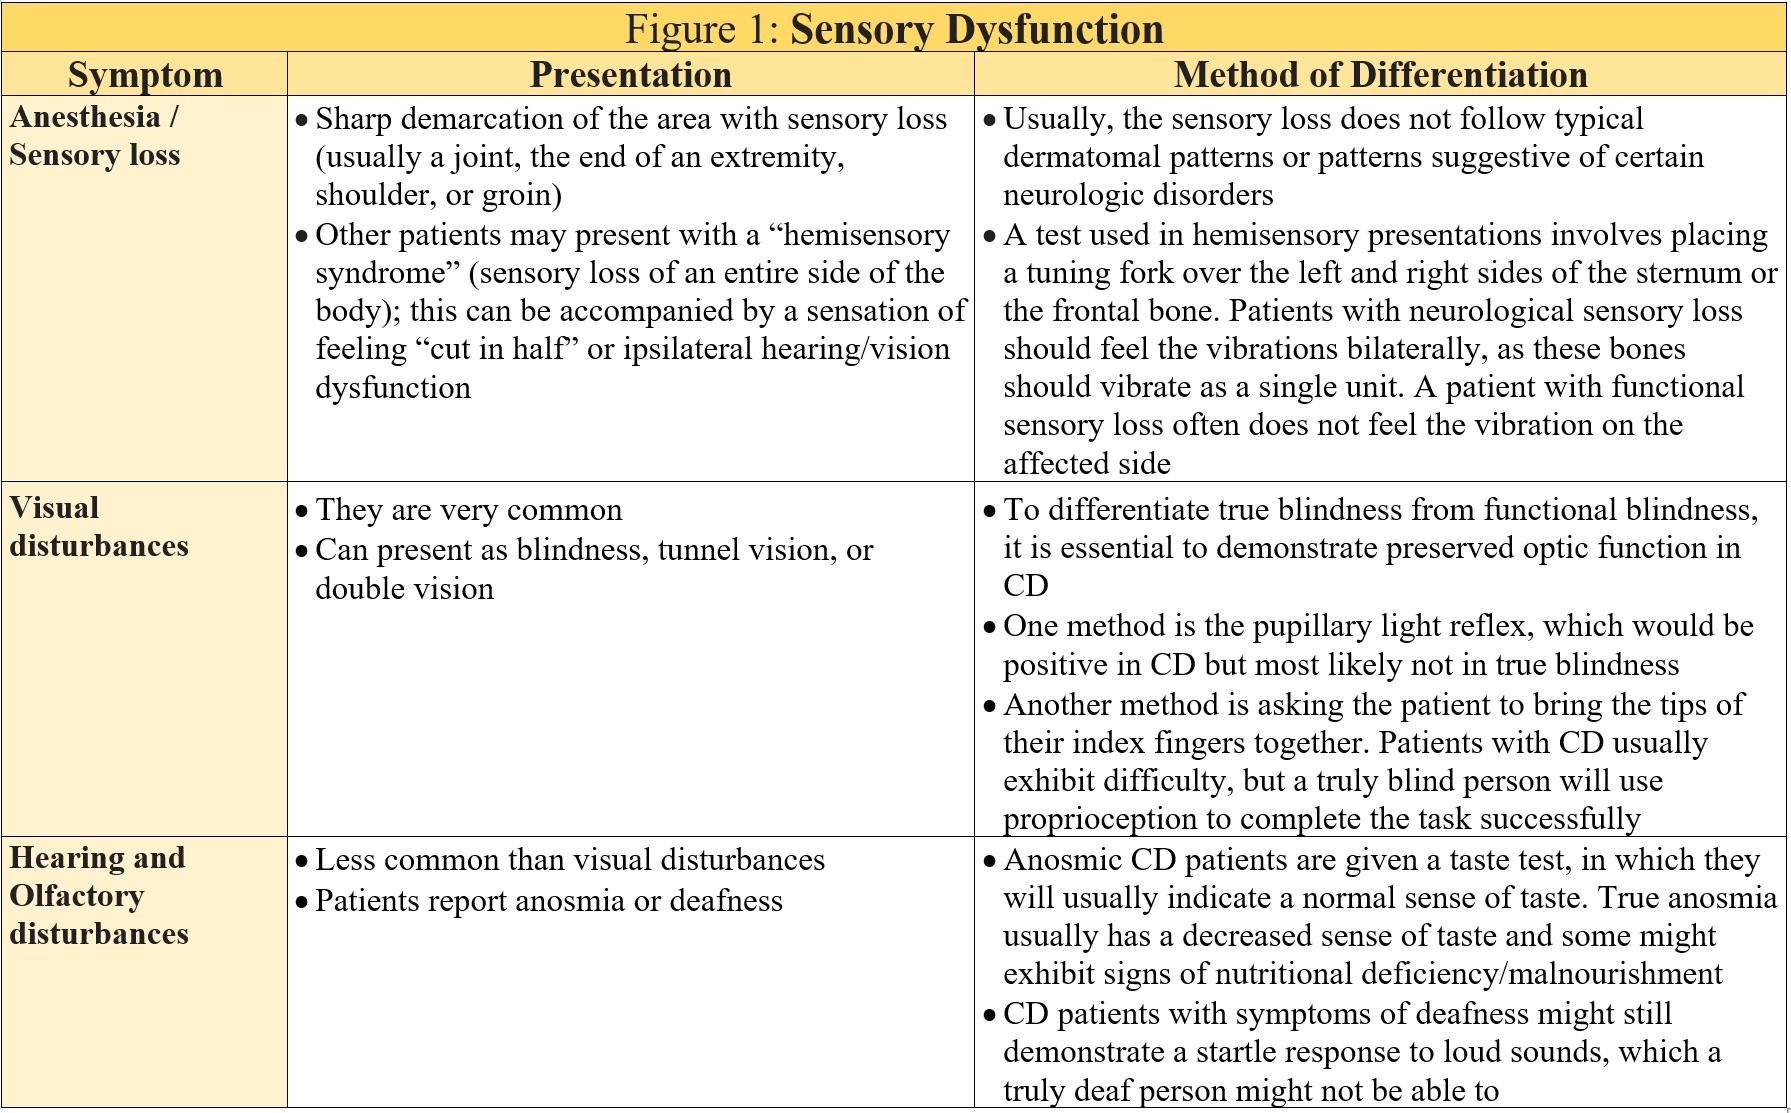 Presentation of sensory dysfunction in conversion disorder